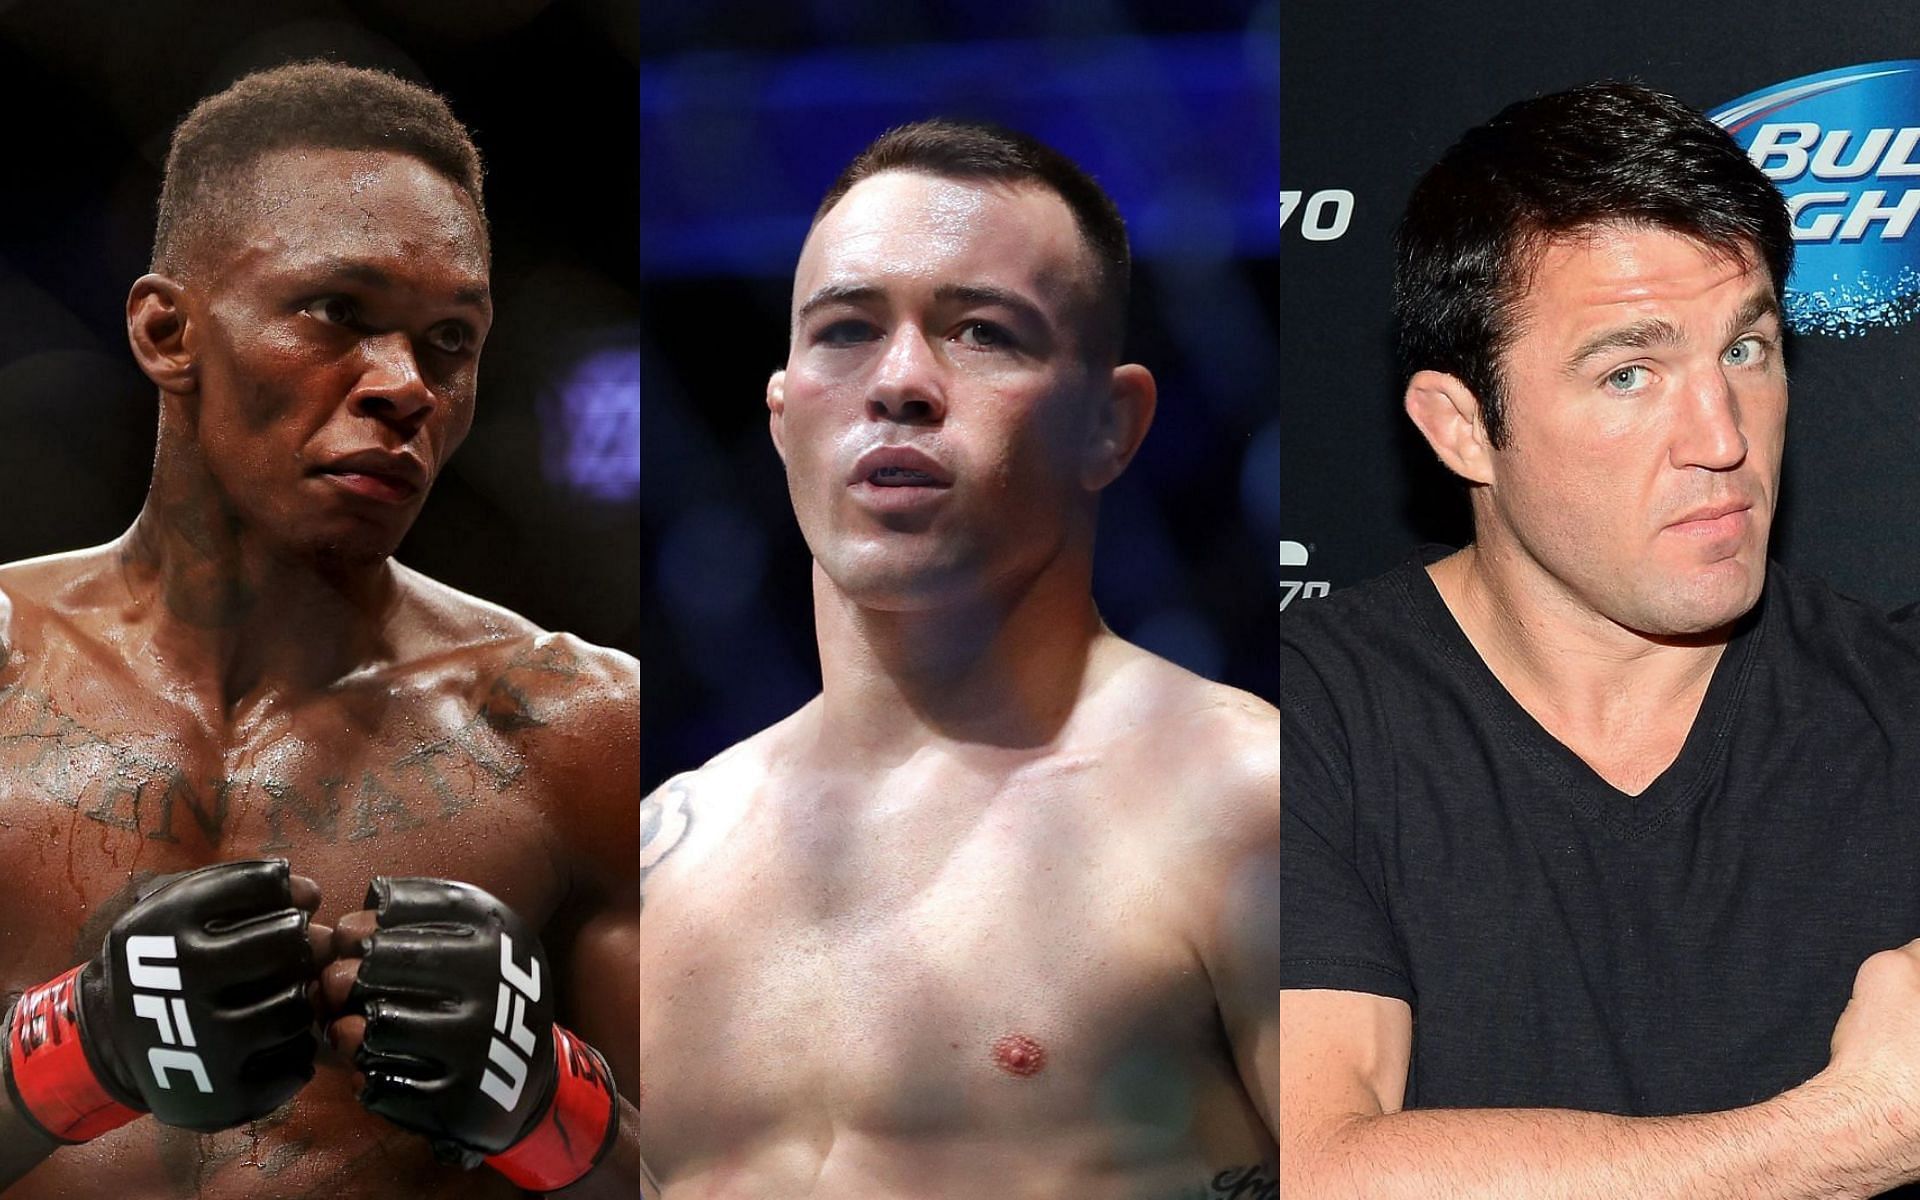 Chael Sonnen has questioned UFC middleweights for allowing Colby Covington to call out Israel Adesanya